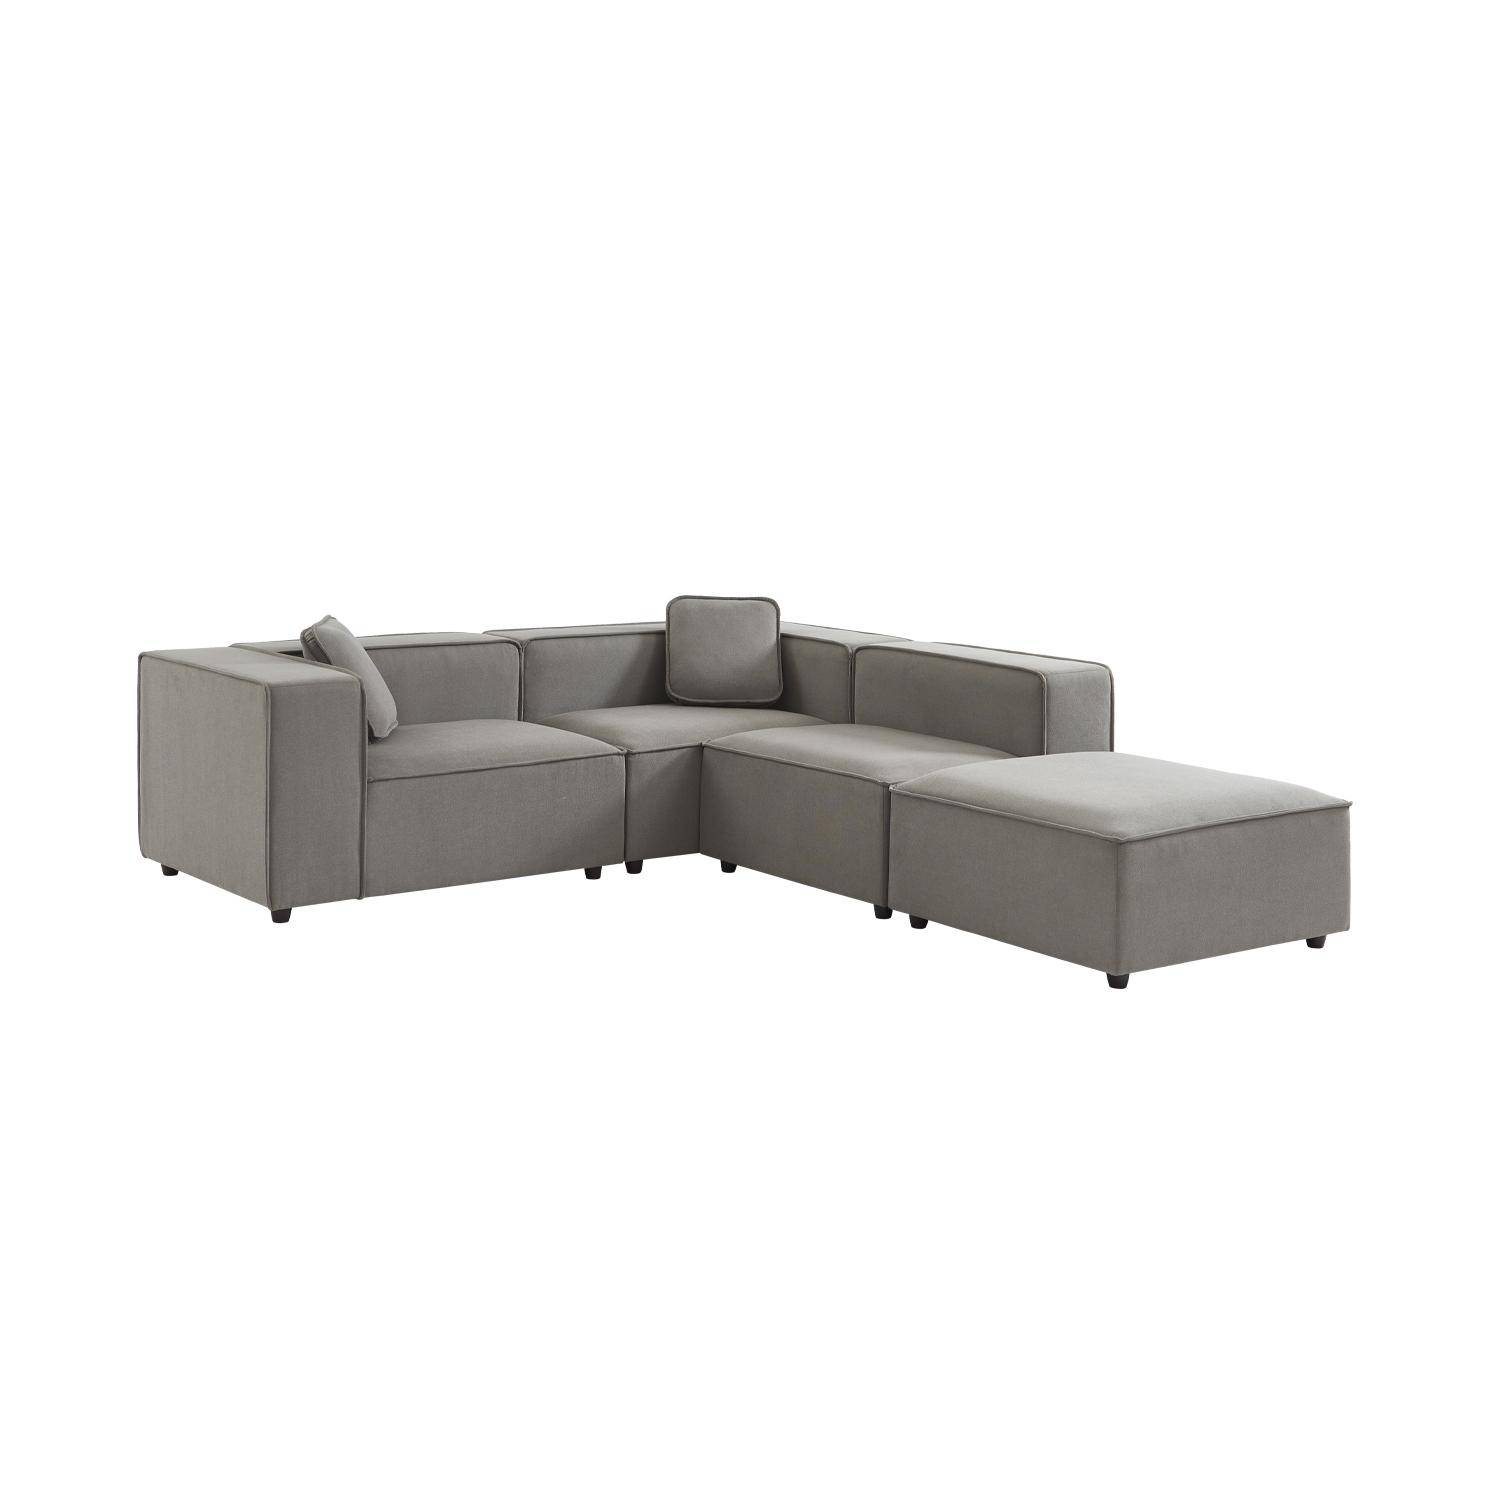 Modular sofa in water-repellent grey fabric for 3-4 people, 2 corners + 1 seat + 1 footstool Photo4